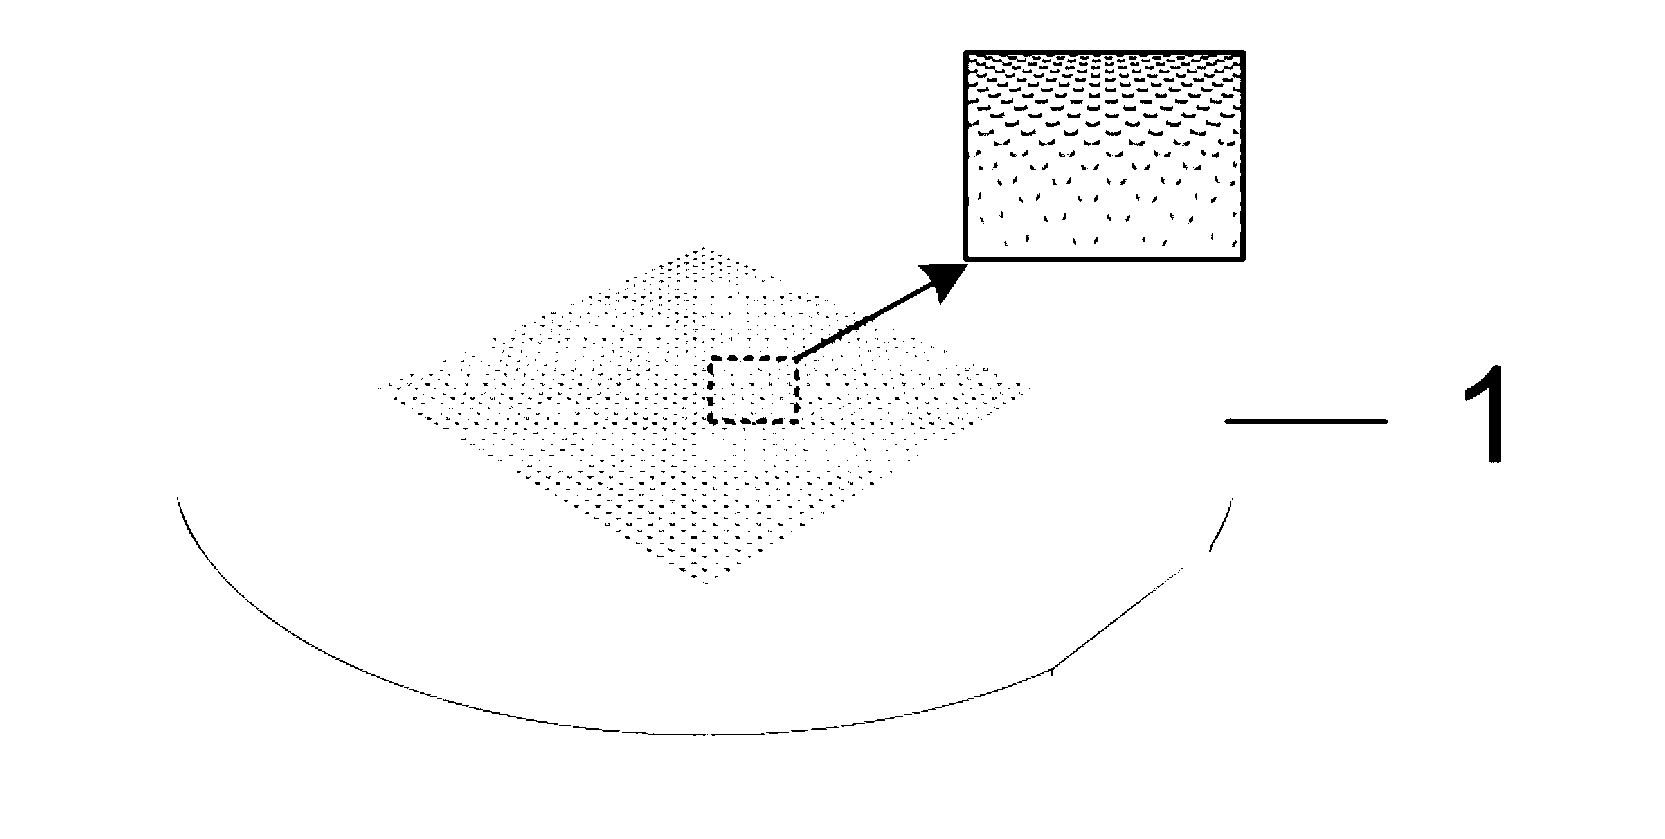 Method for manufacturing polydimethylsiloxane (PDMS) film with integrated microstructure